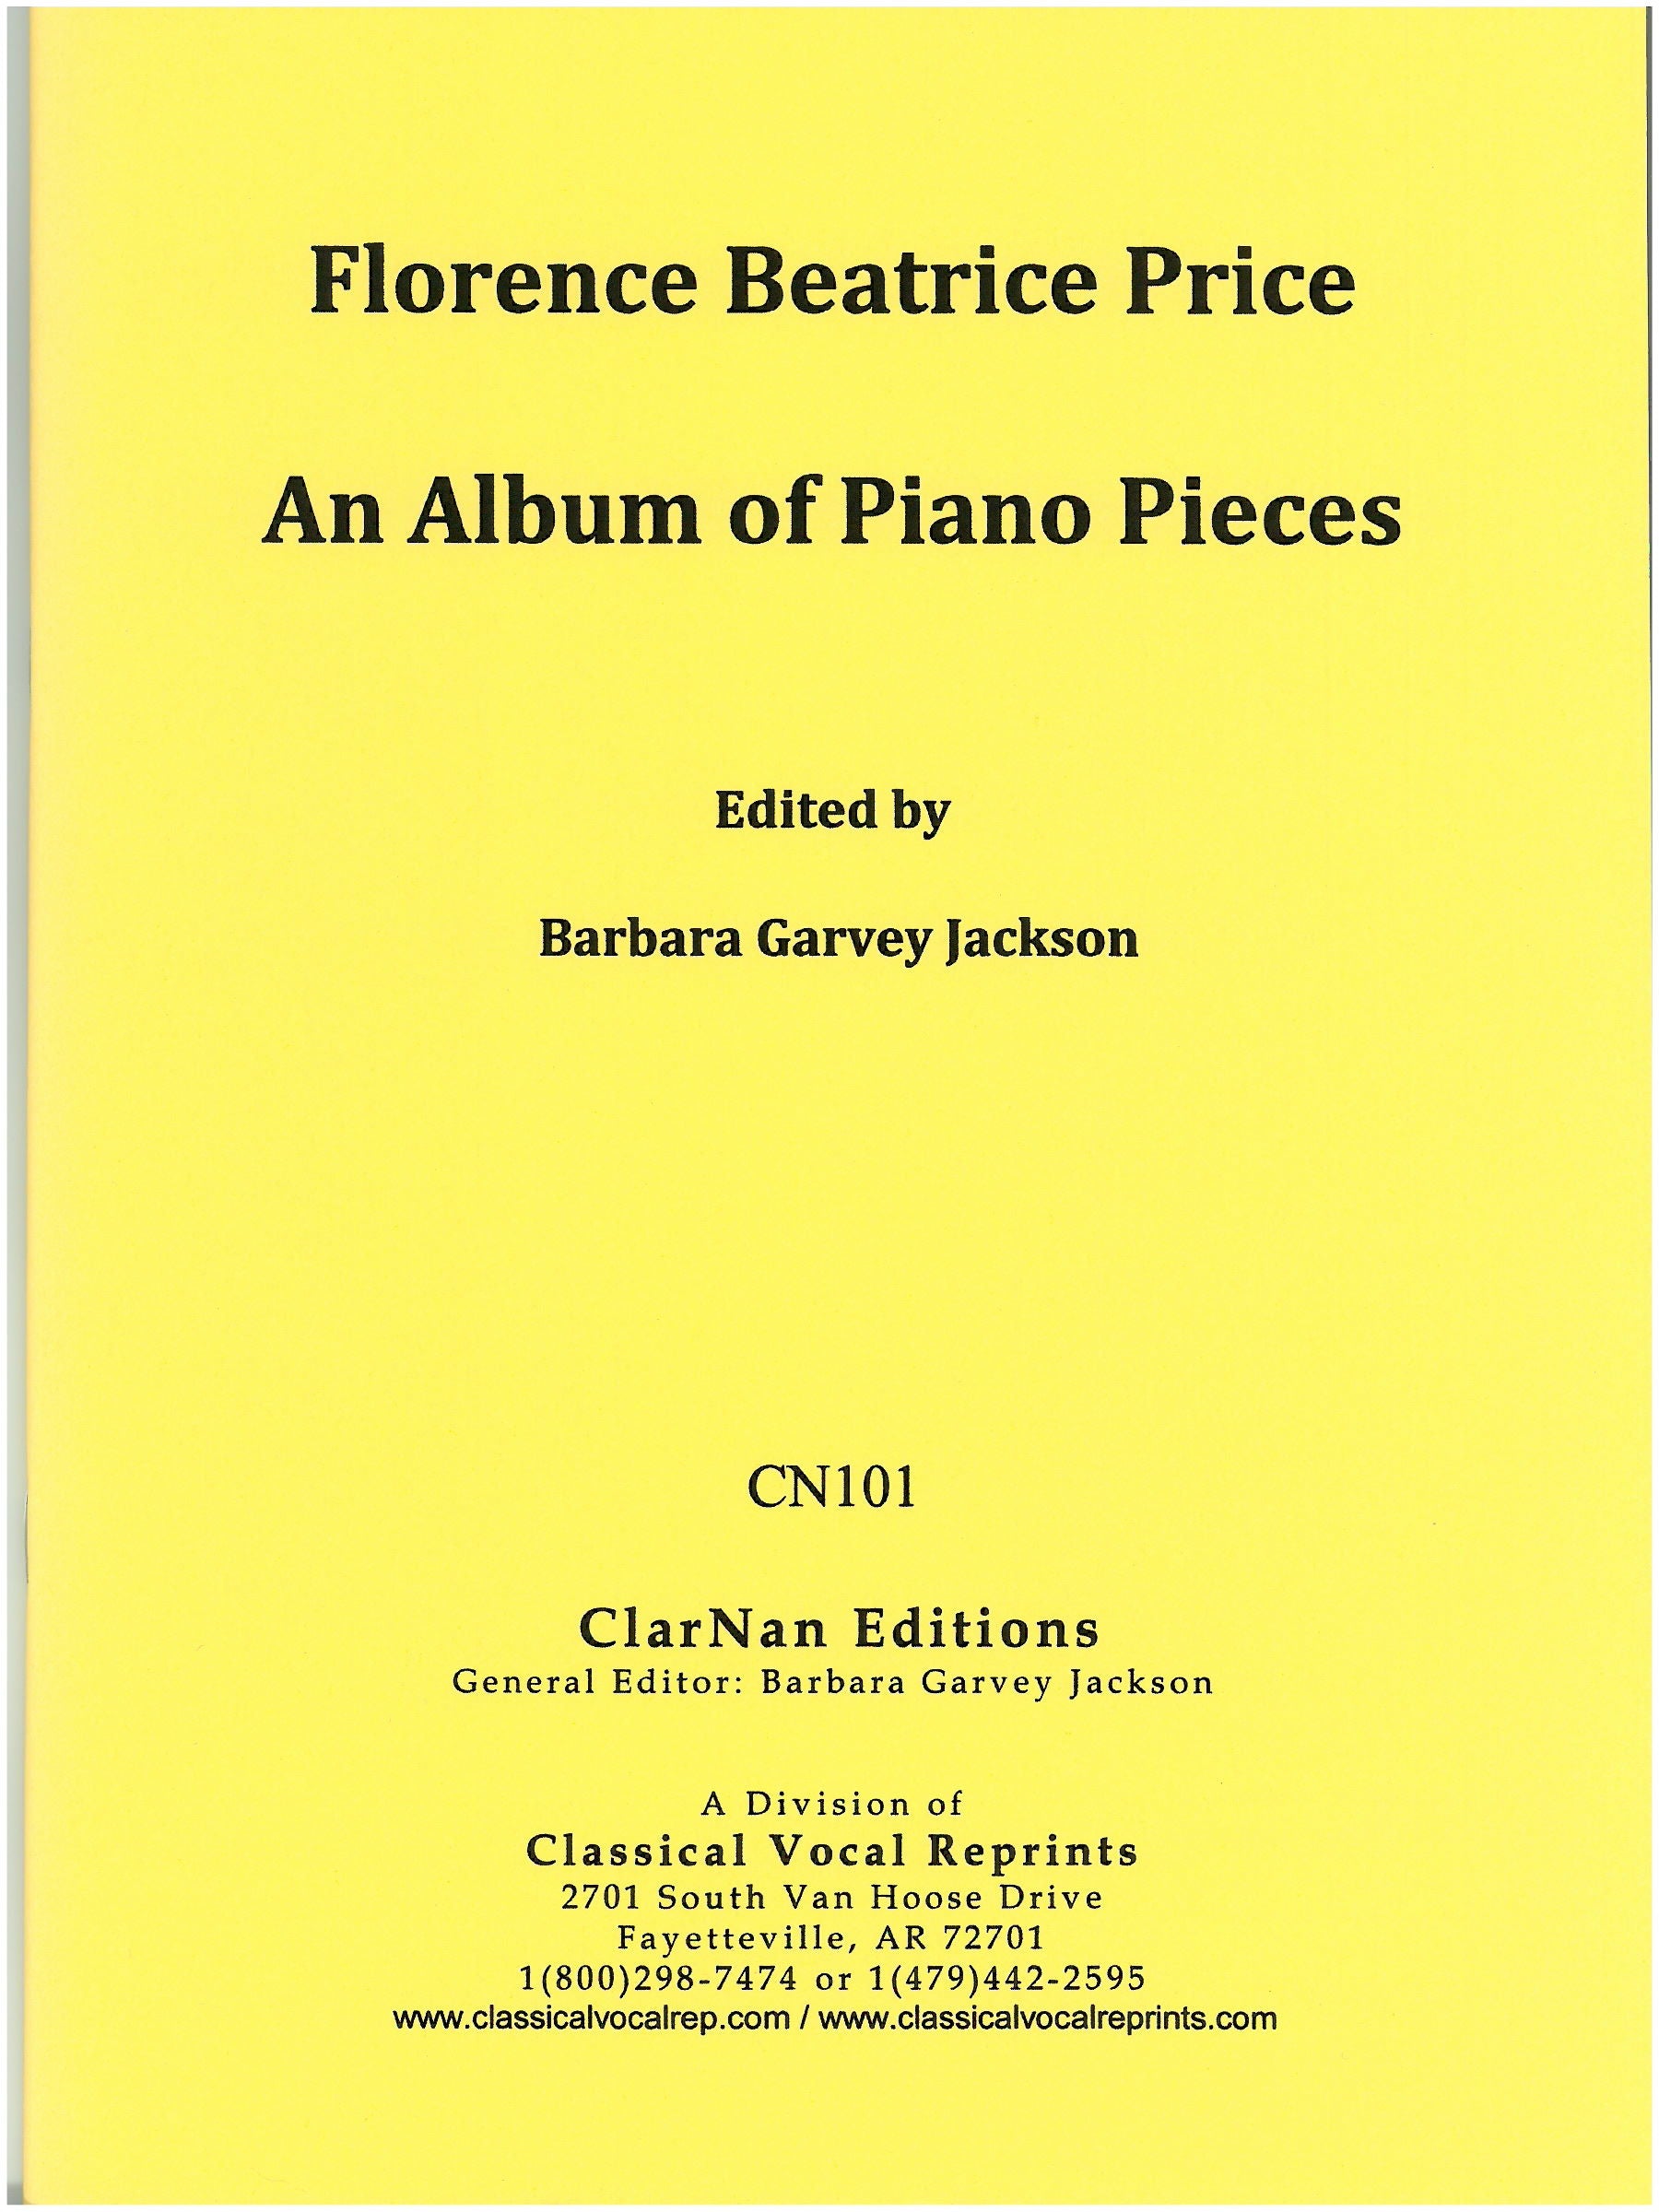 Price: An Album of Piano Pieces